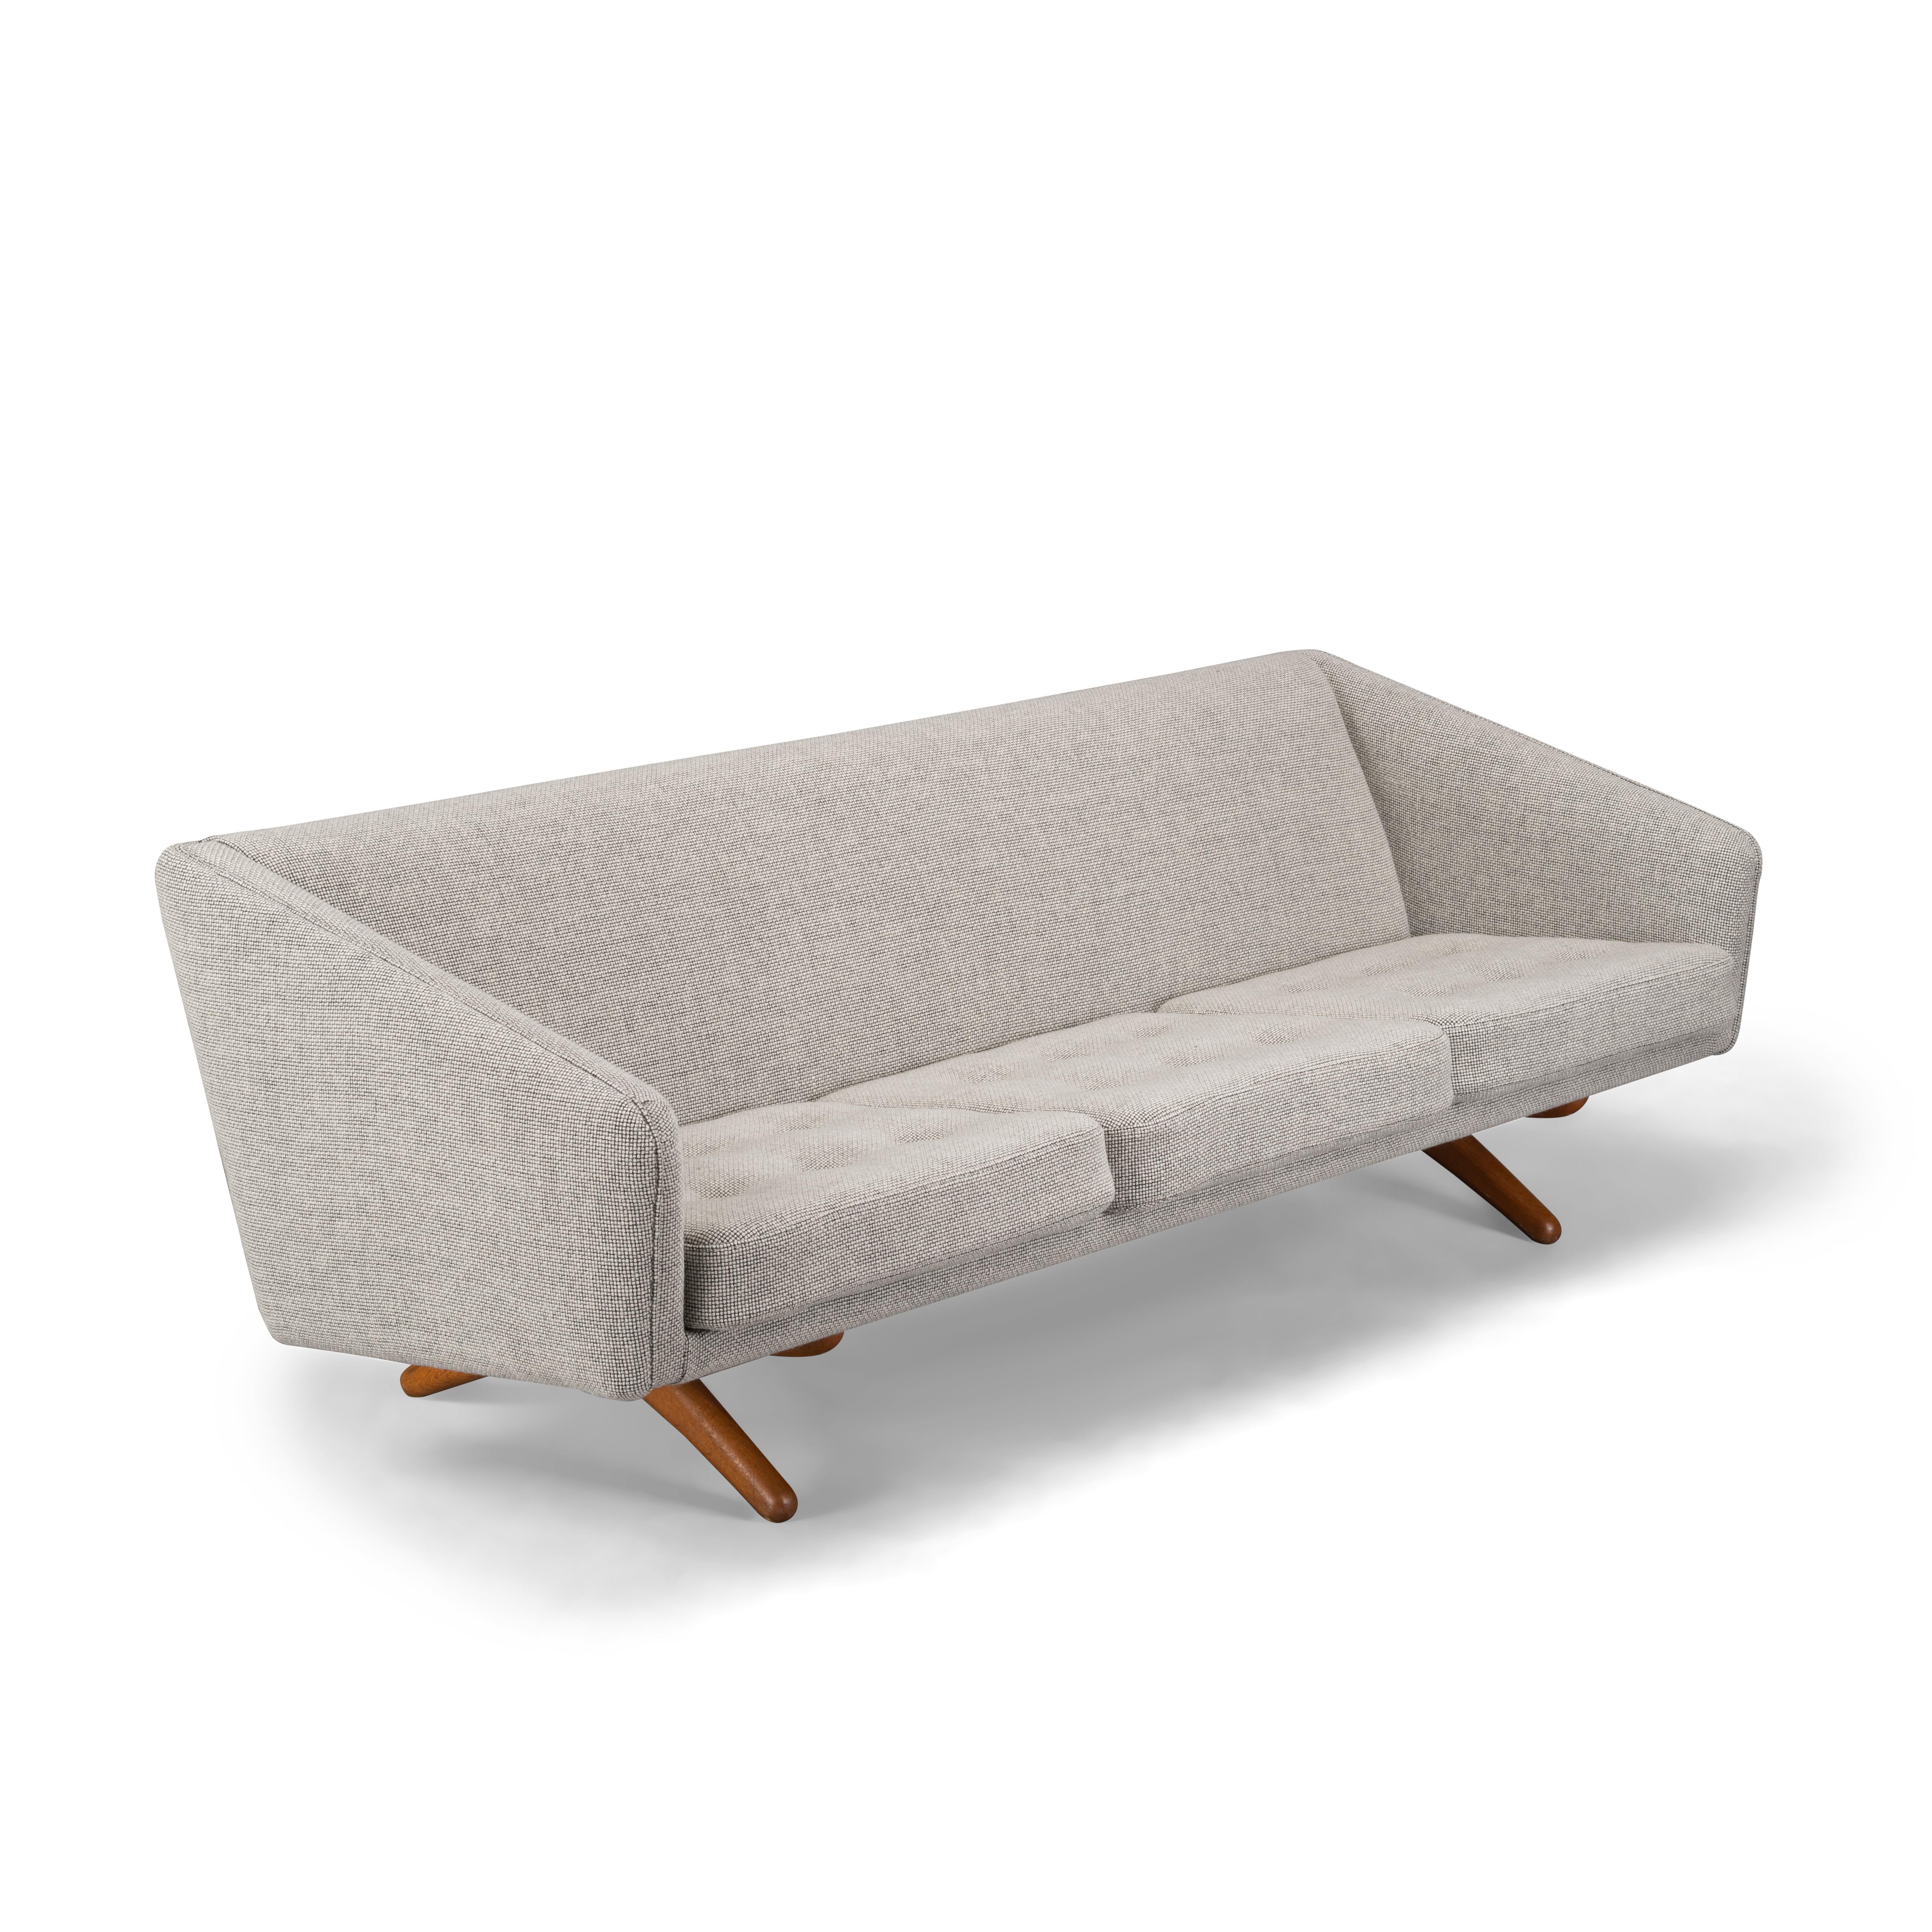 Clearly recognizable as a Illum Wikkelsø design is this comfortable ML-90 sofa. This sofa was made mid-1960s by the Michael Laursen factory. A fairly unconventional design with quadrangle side face and crossed solid teak legs that support the back